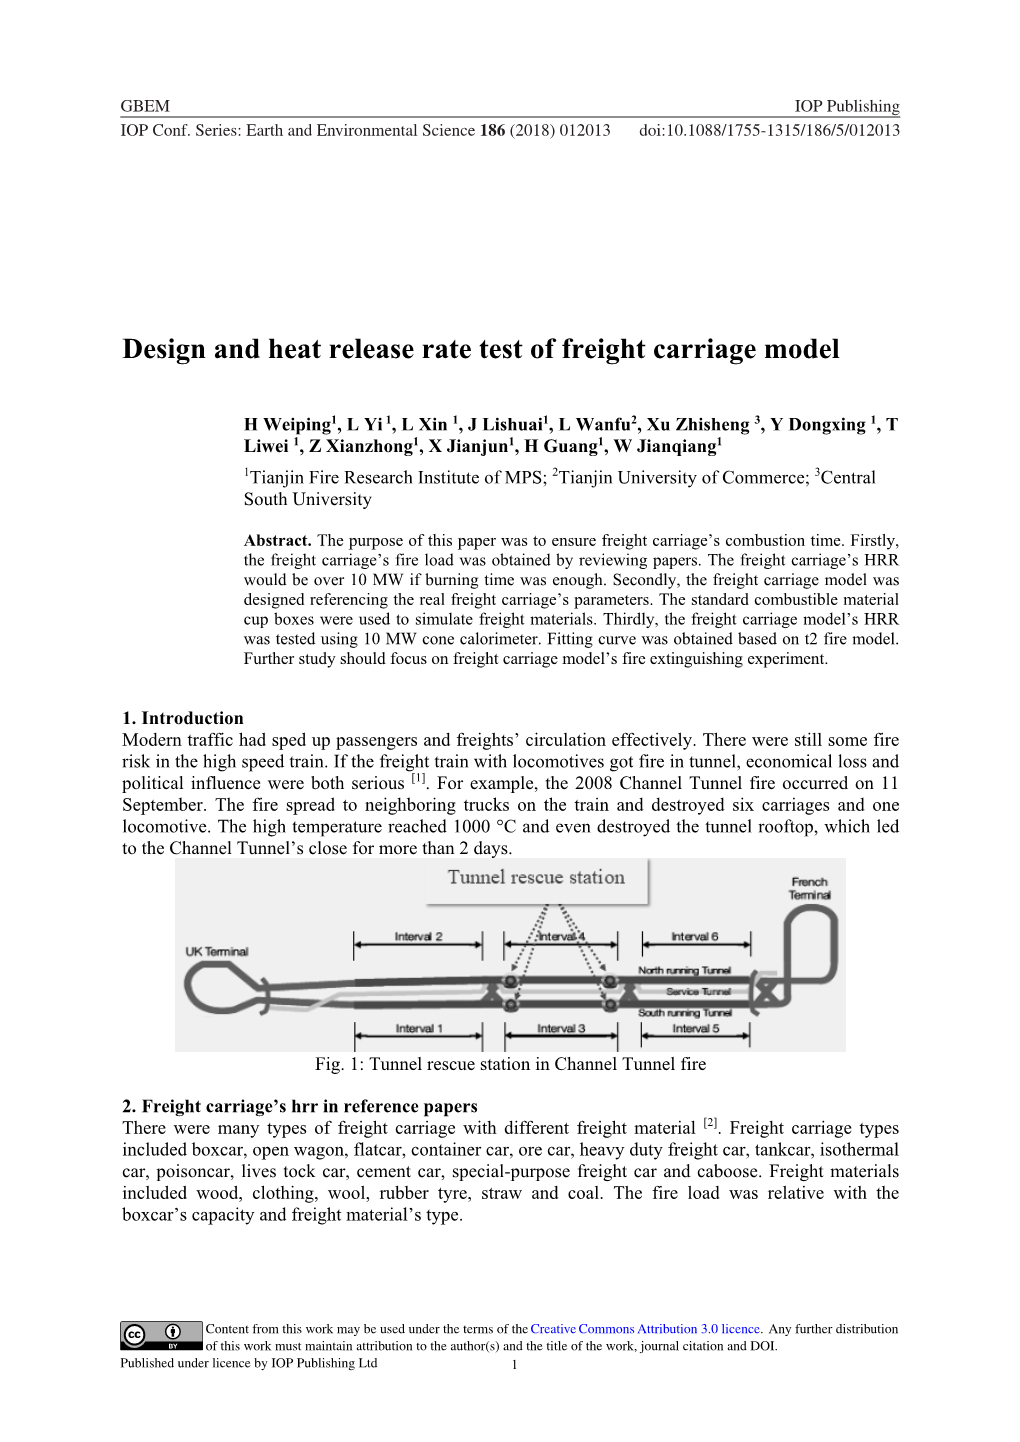 Design and Heat Release Rate Test of Freight Carriage Model